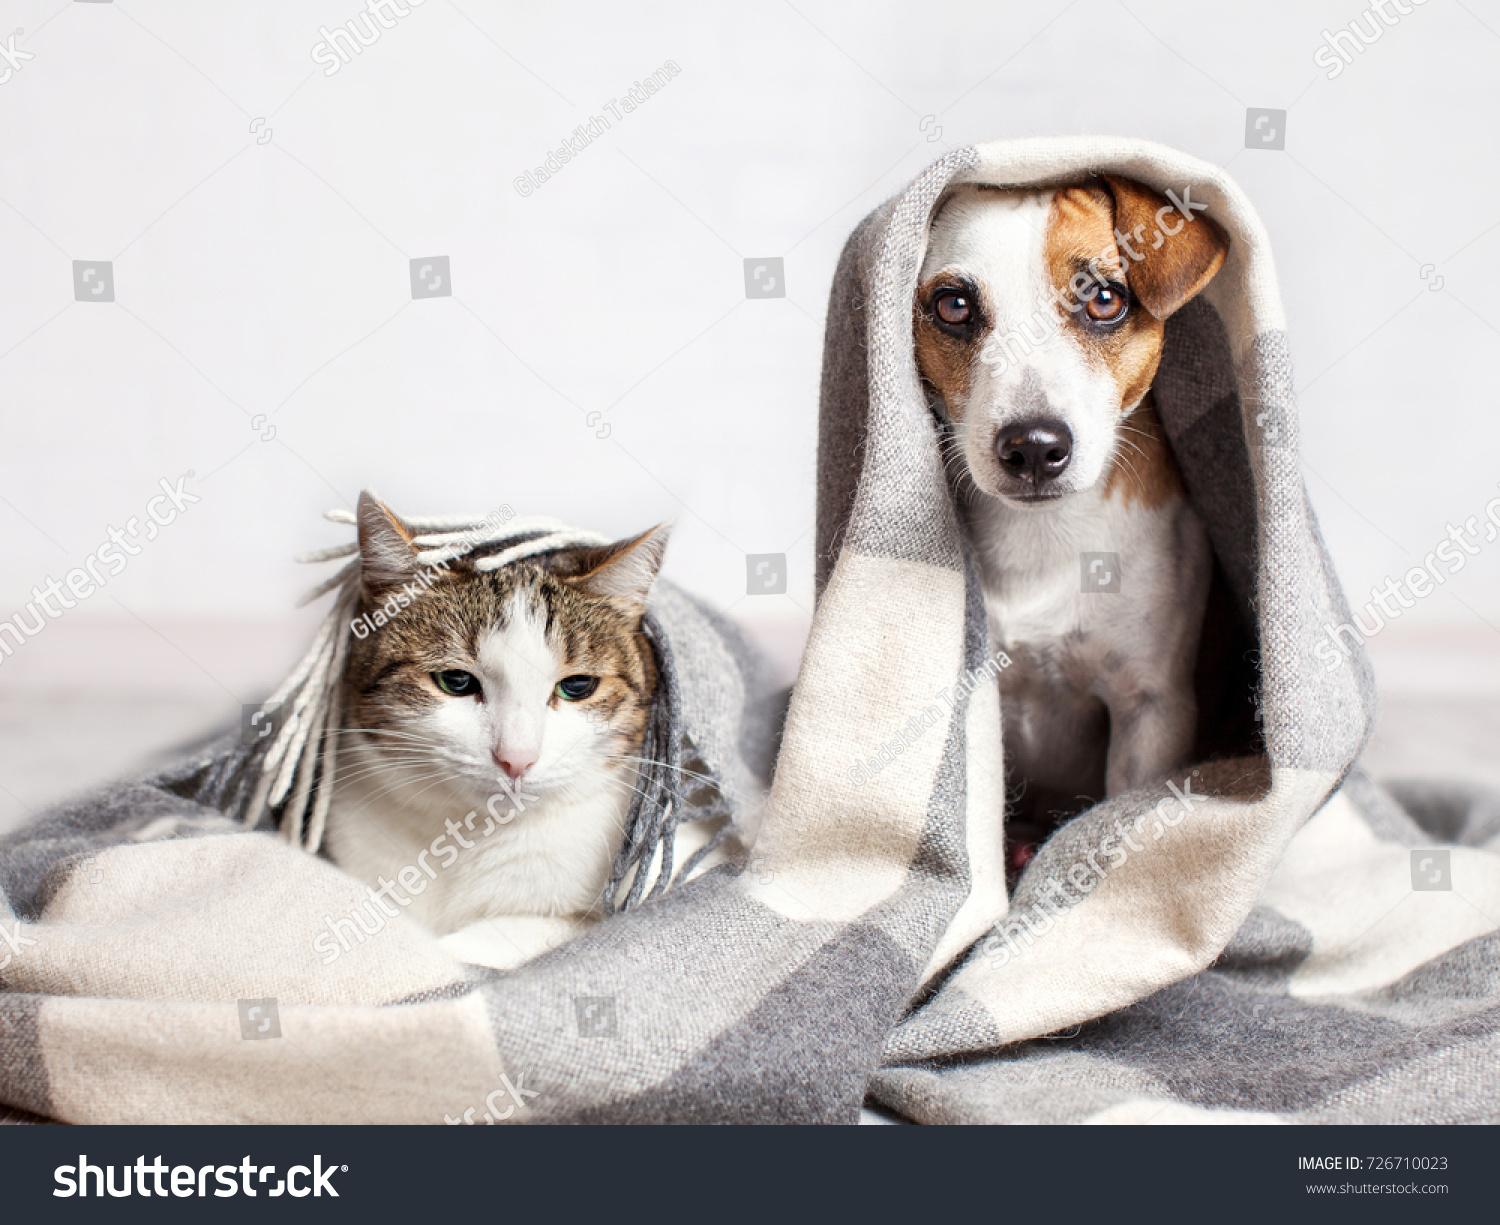 Dog and cat under a plaid. Pet warms under a blanket in cold autumn weather #726710023